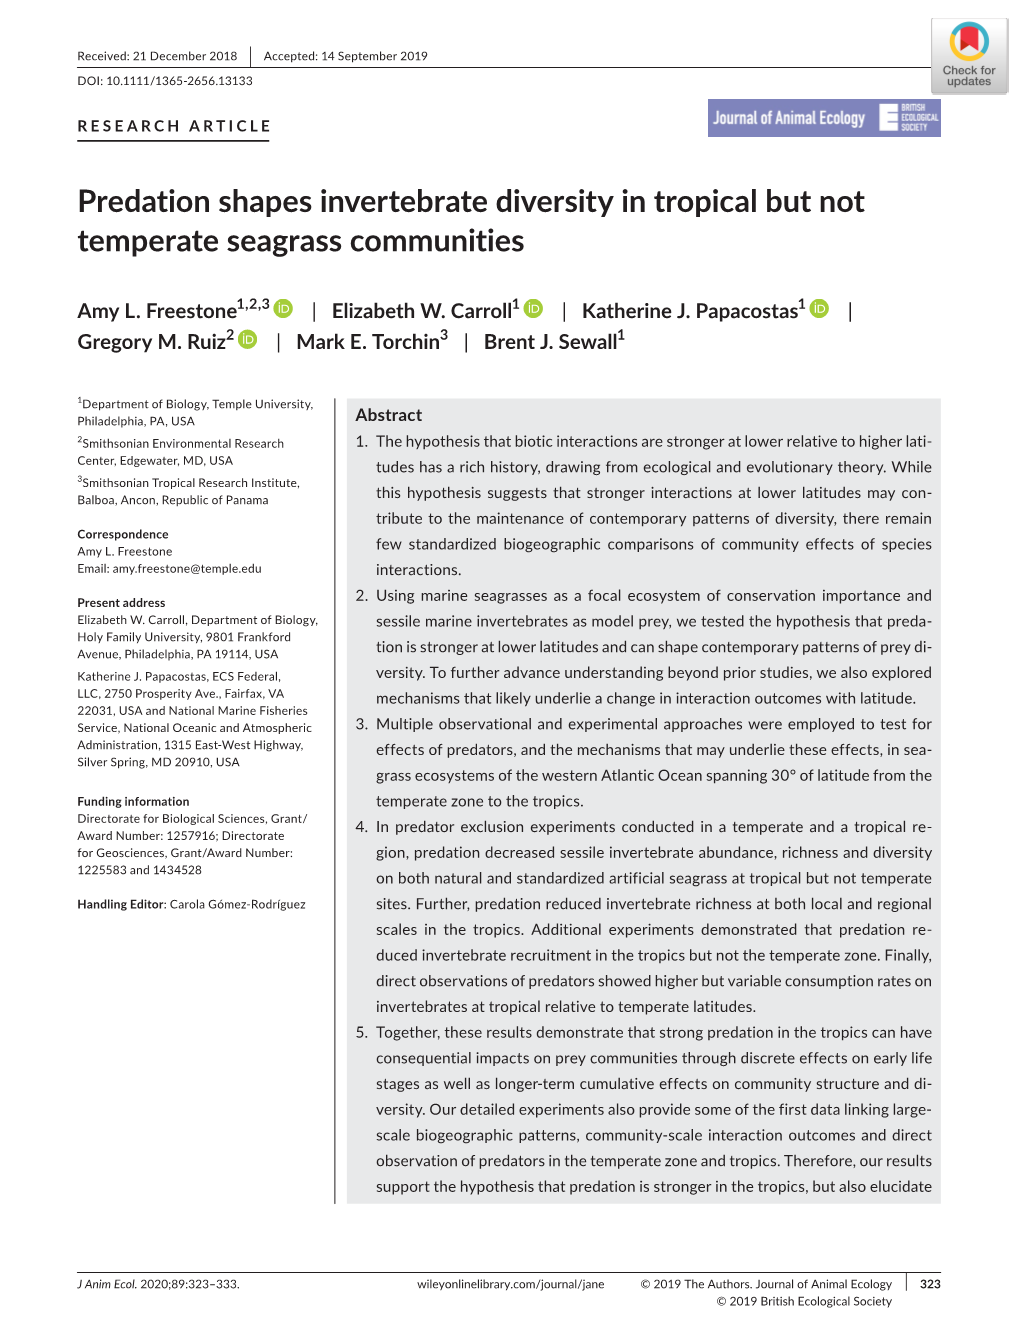 Predation Shapes Invertebrate Diversity in Tropical but Not Temperate Seagrass Communities